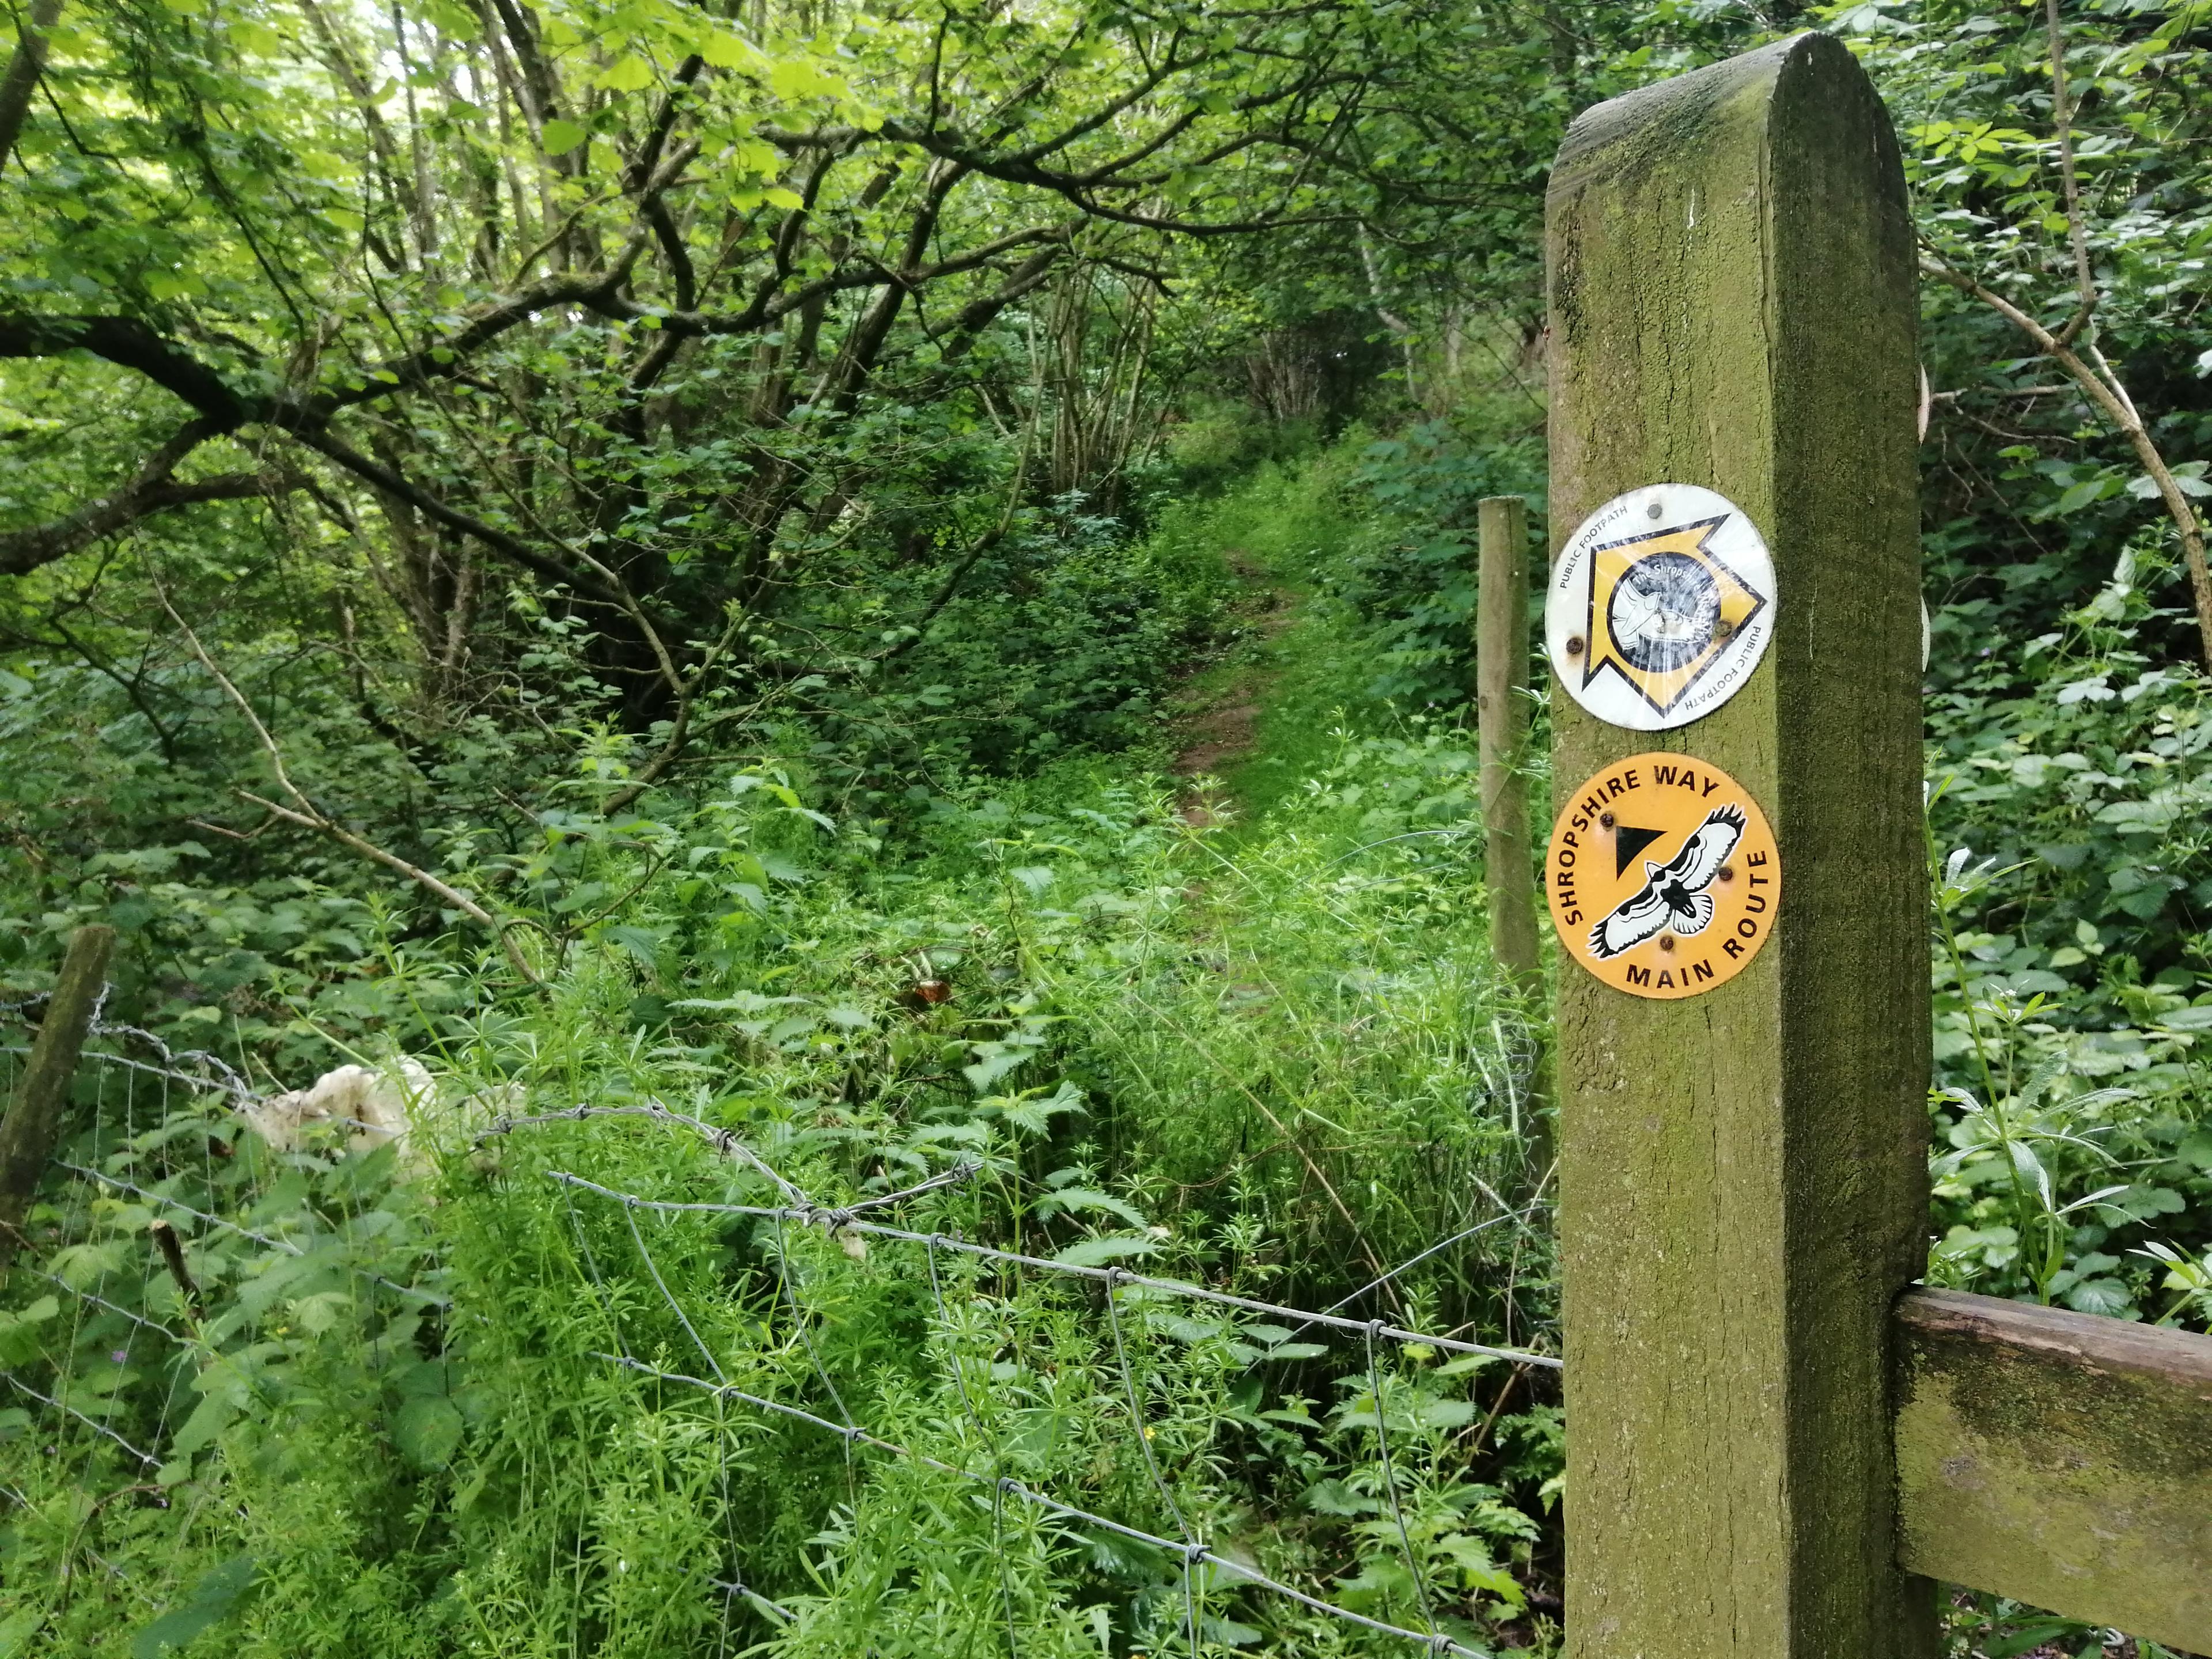 Signpost on the Shropshire Way